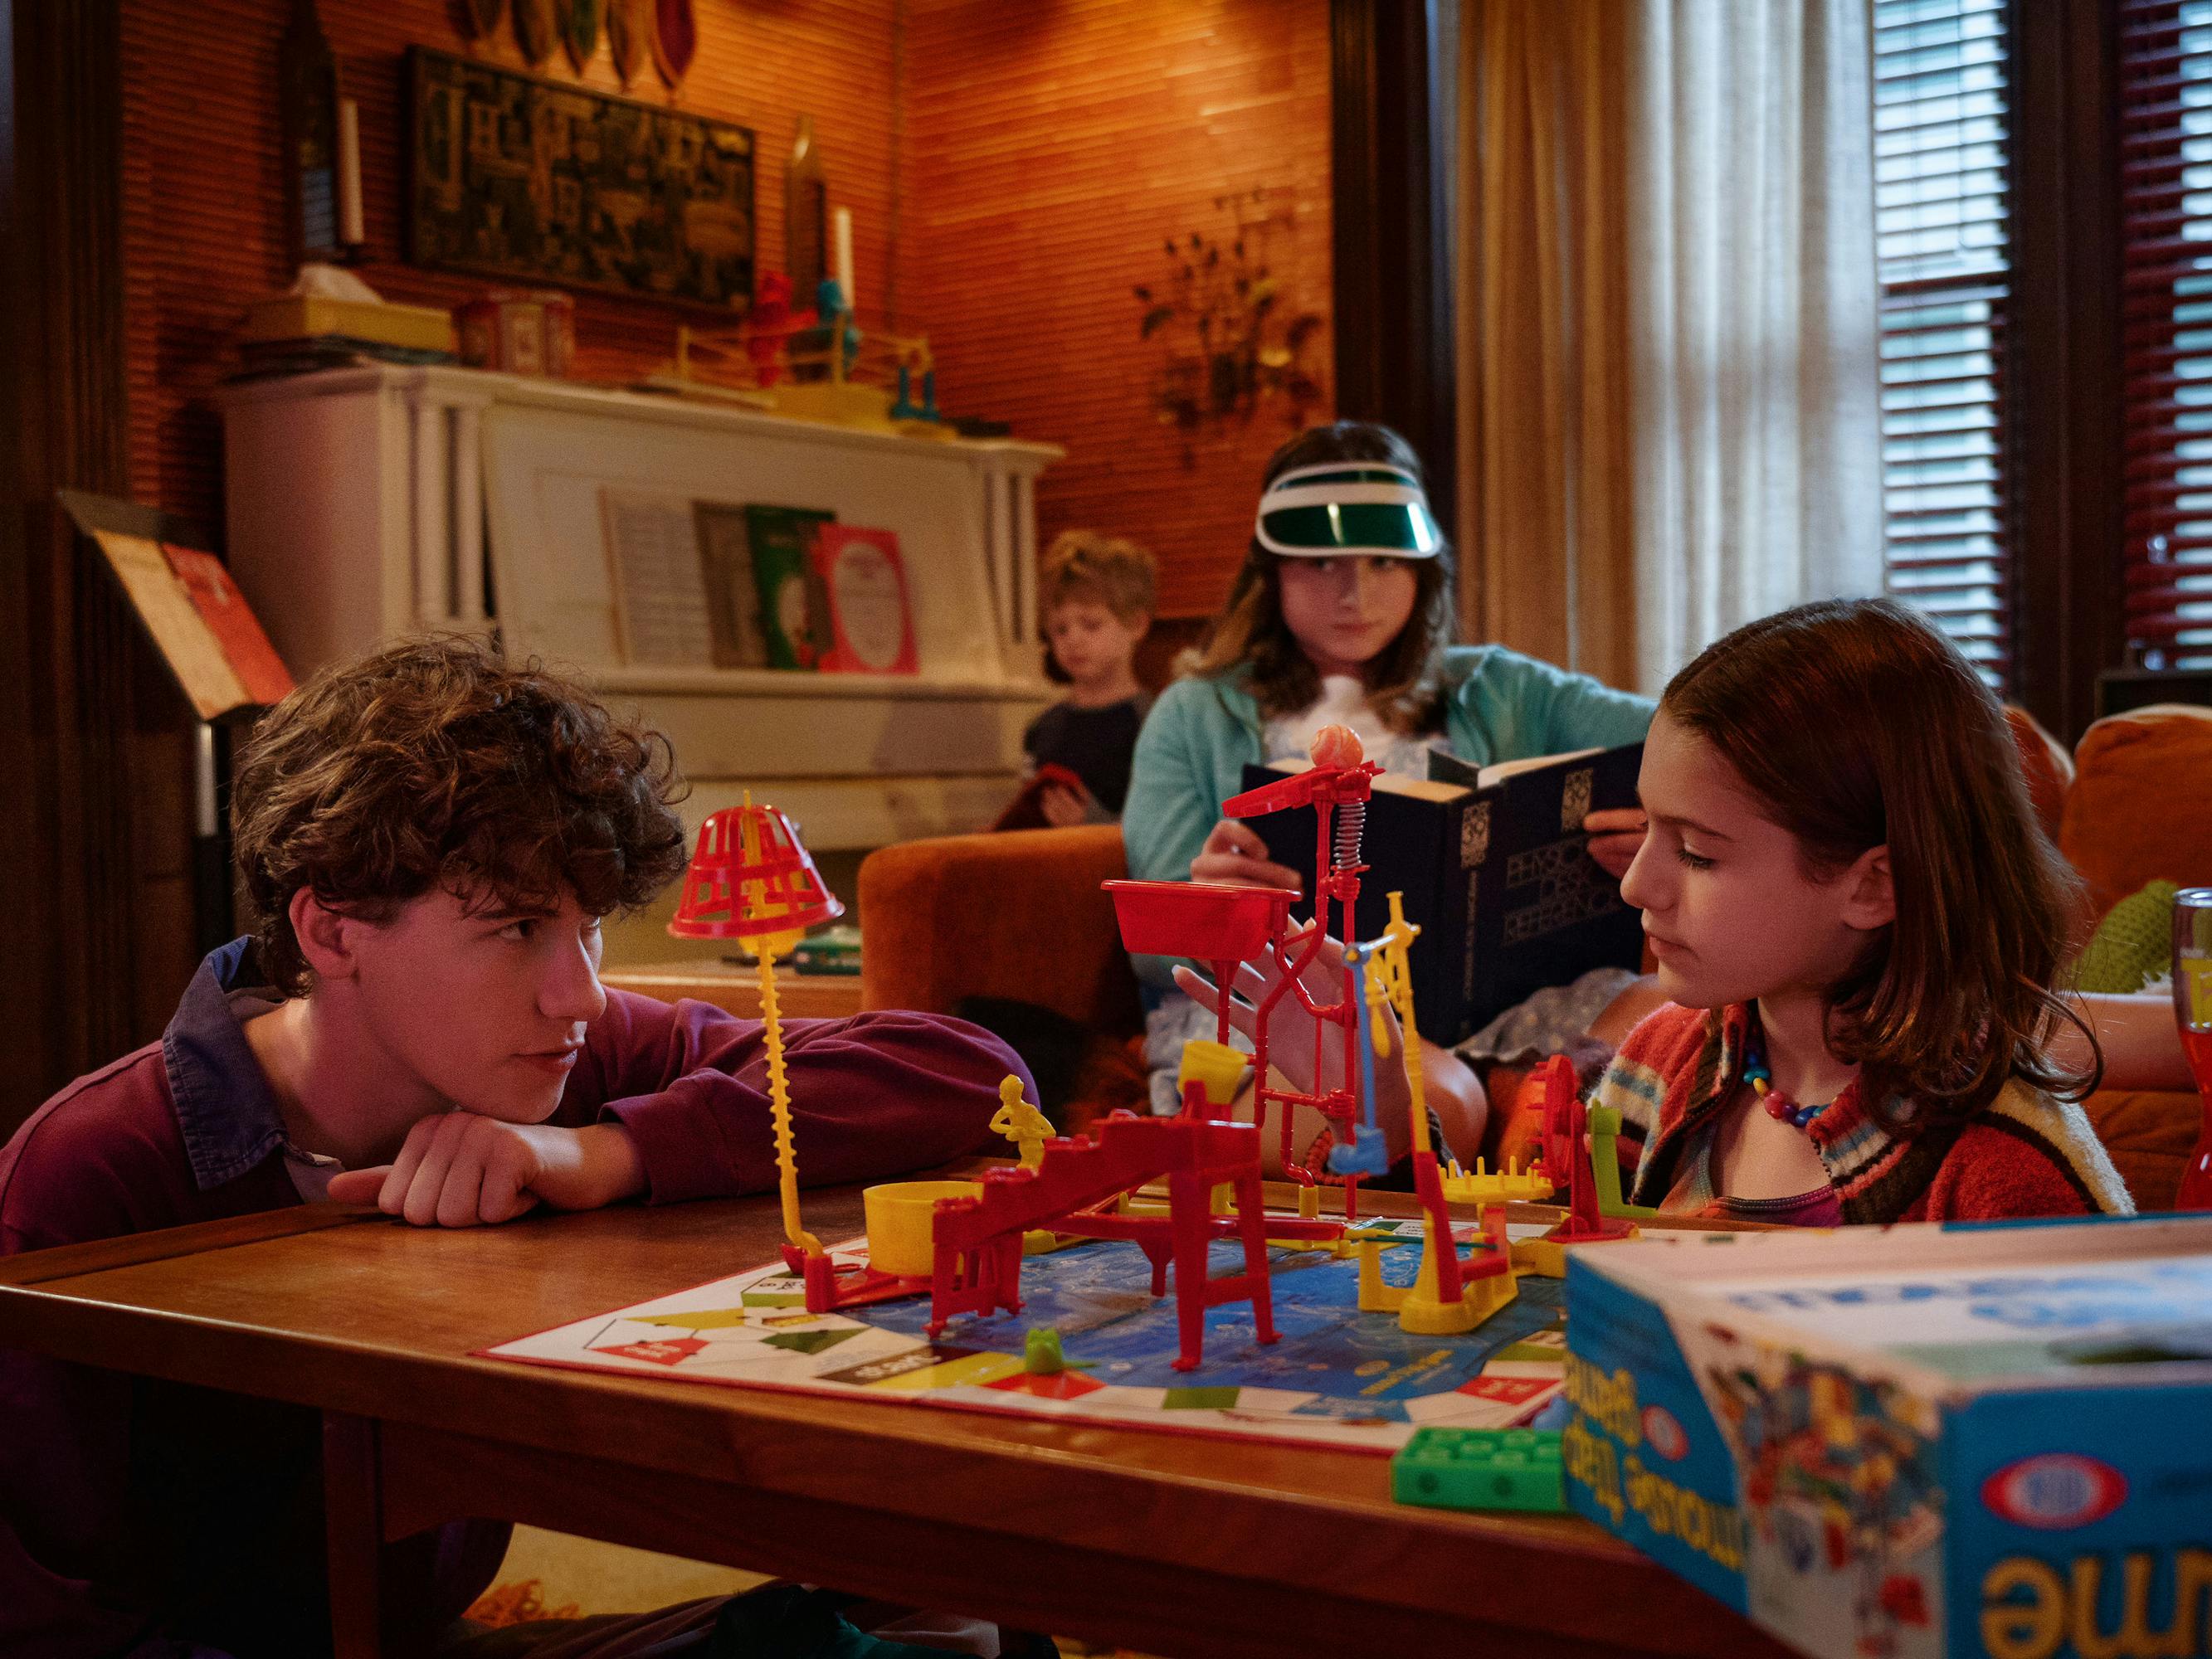 Heinrich (Sam Nivola), Wilder (Henry/Dean Moore), Denise (Raffey Cassidy), and Steffie (May Nivola) sit together in a cozily-lit room, strewn with toys.